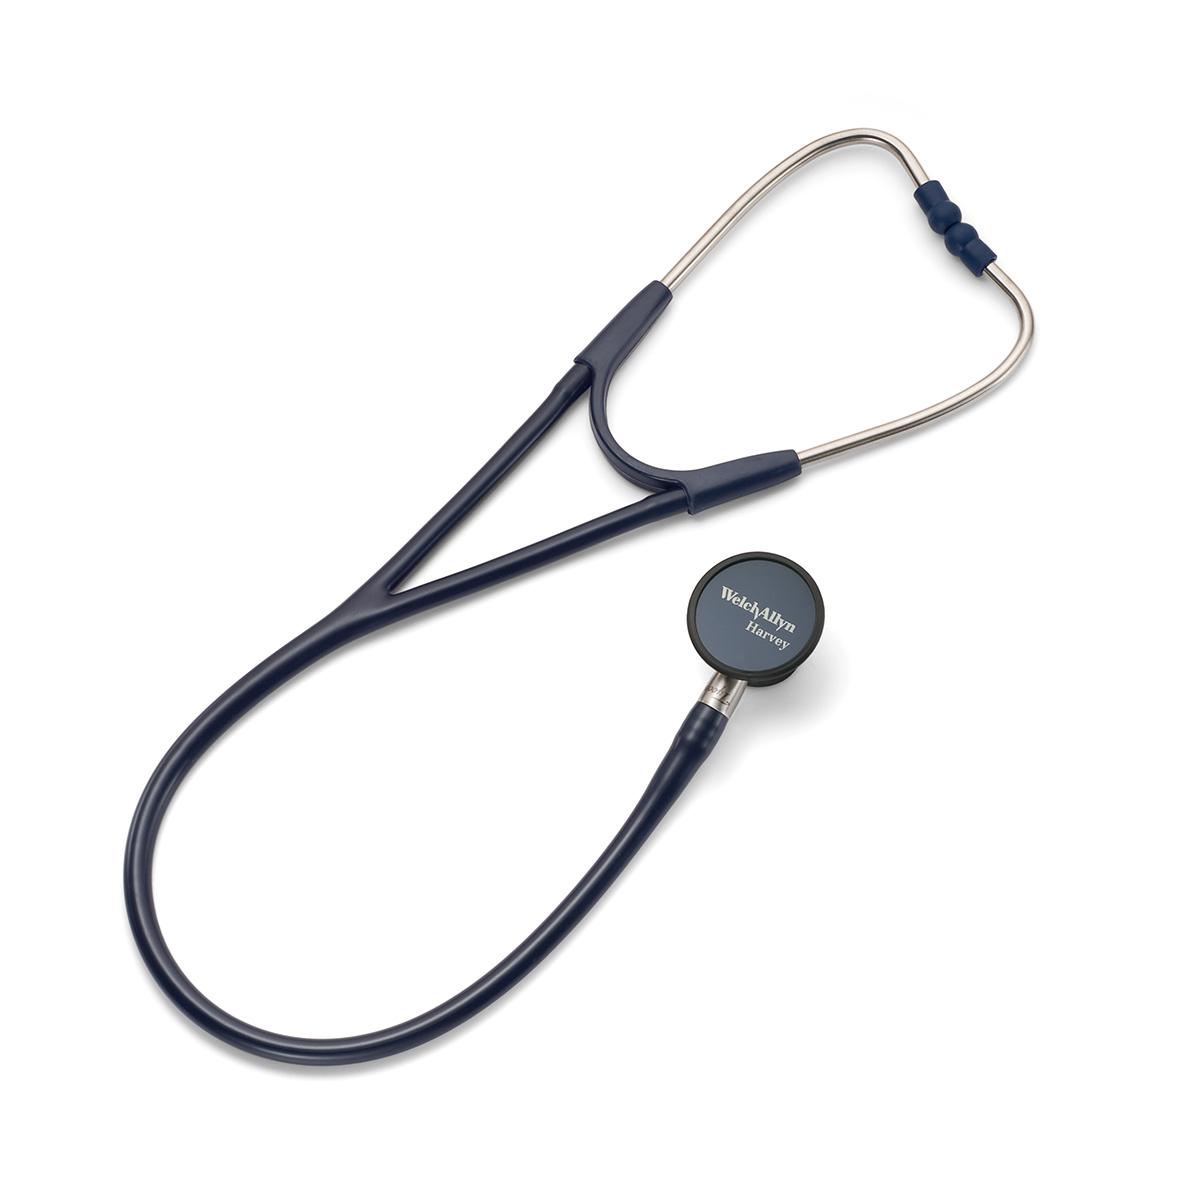 The Welch Allyn Harvey Elite Stethoscope, highlighting its dual-bore tubing and stainless steel chest piece